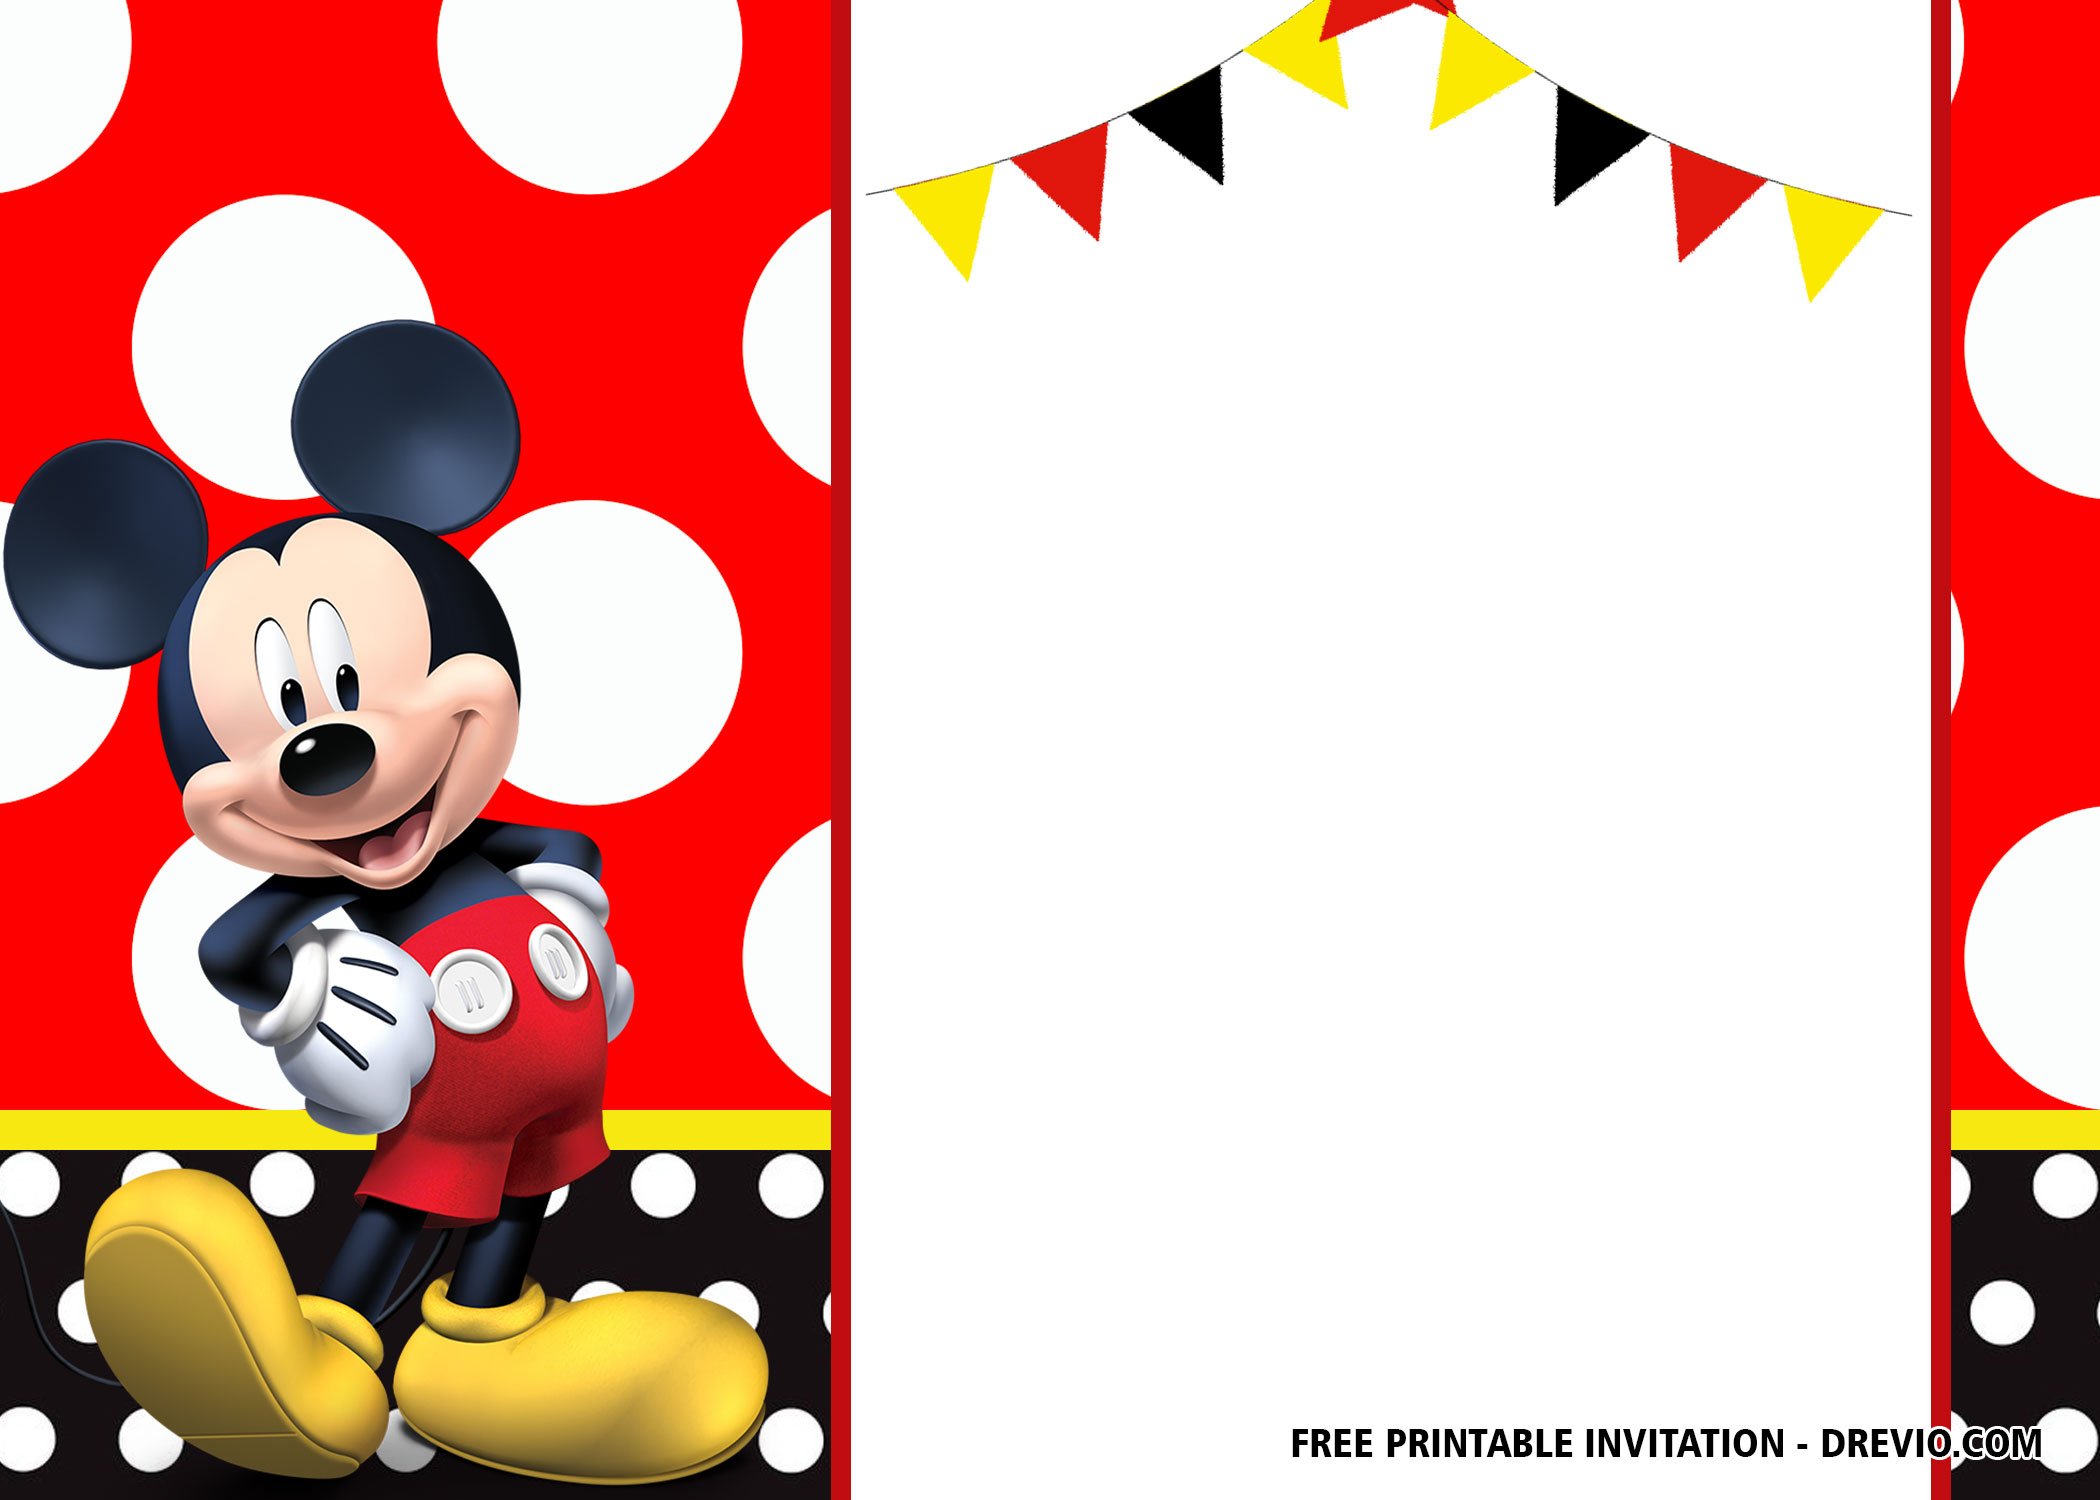 Free Mickey Mouse Birthday Invitation Templates Latest Download Hundreds Free Printable Birthday Invitation Templates